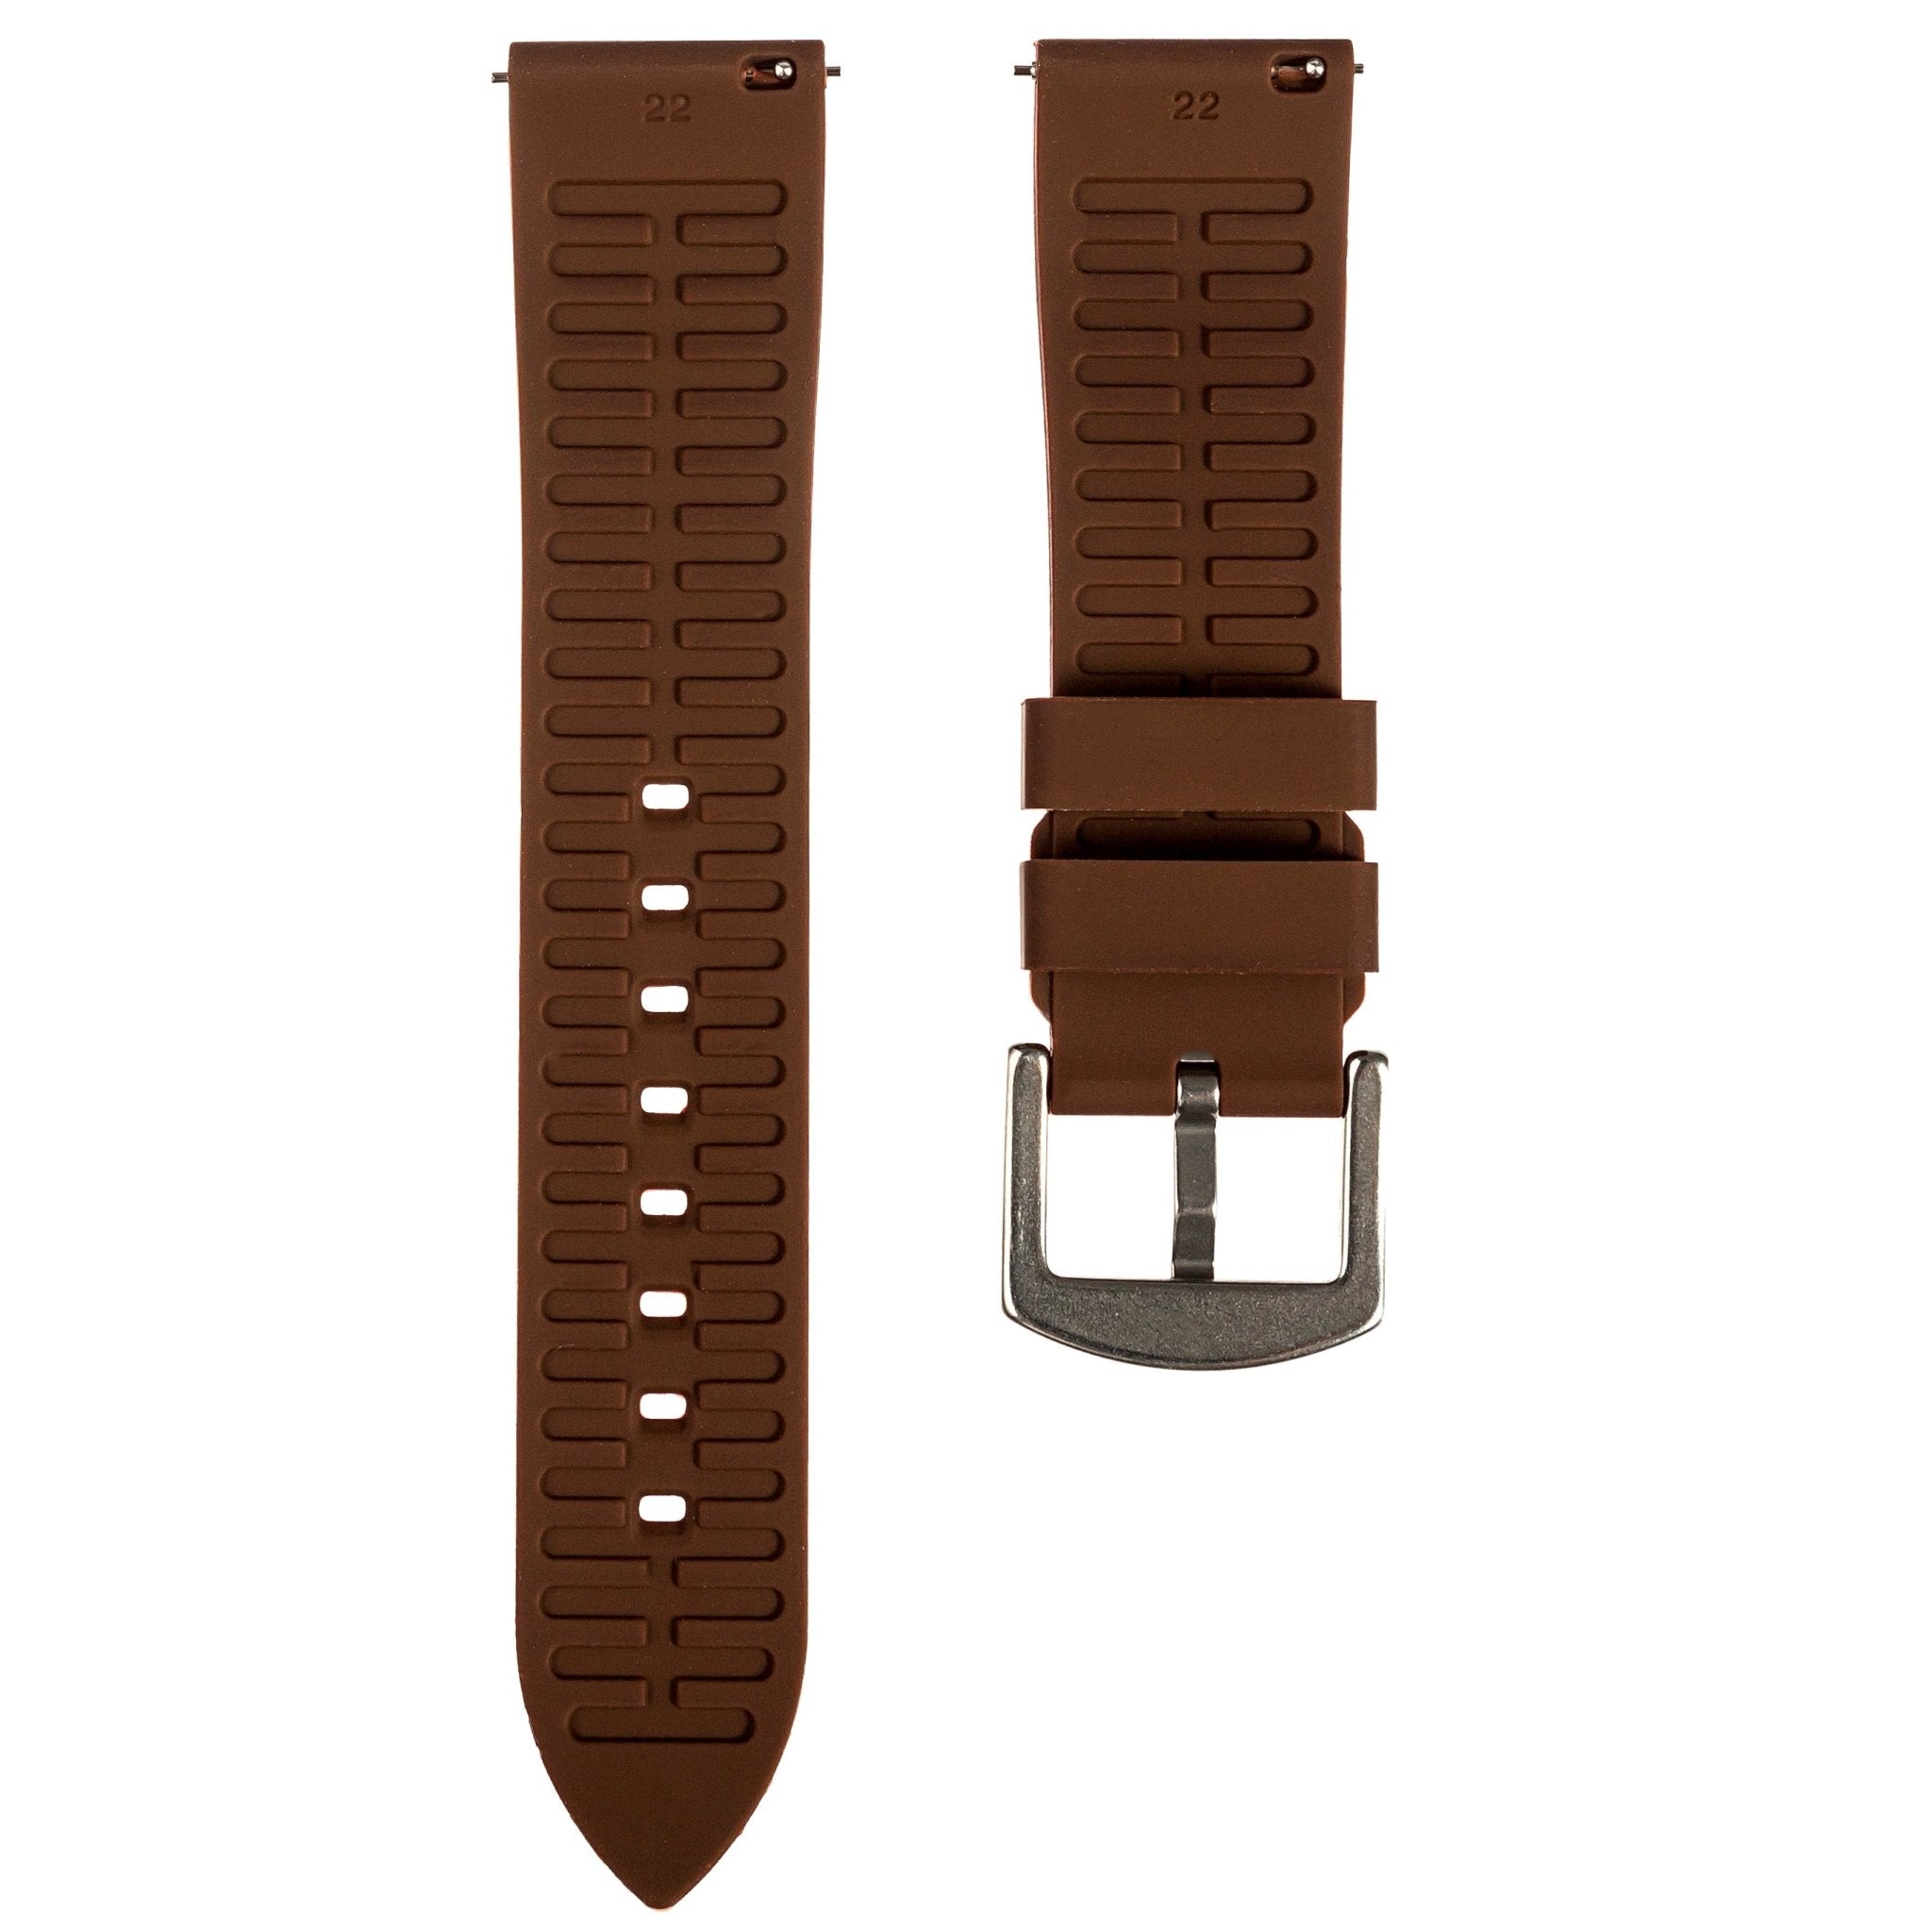 Textured Soft Silicone Strap - Quick-Release – Brown (2402) -StrapSeeker